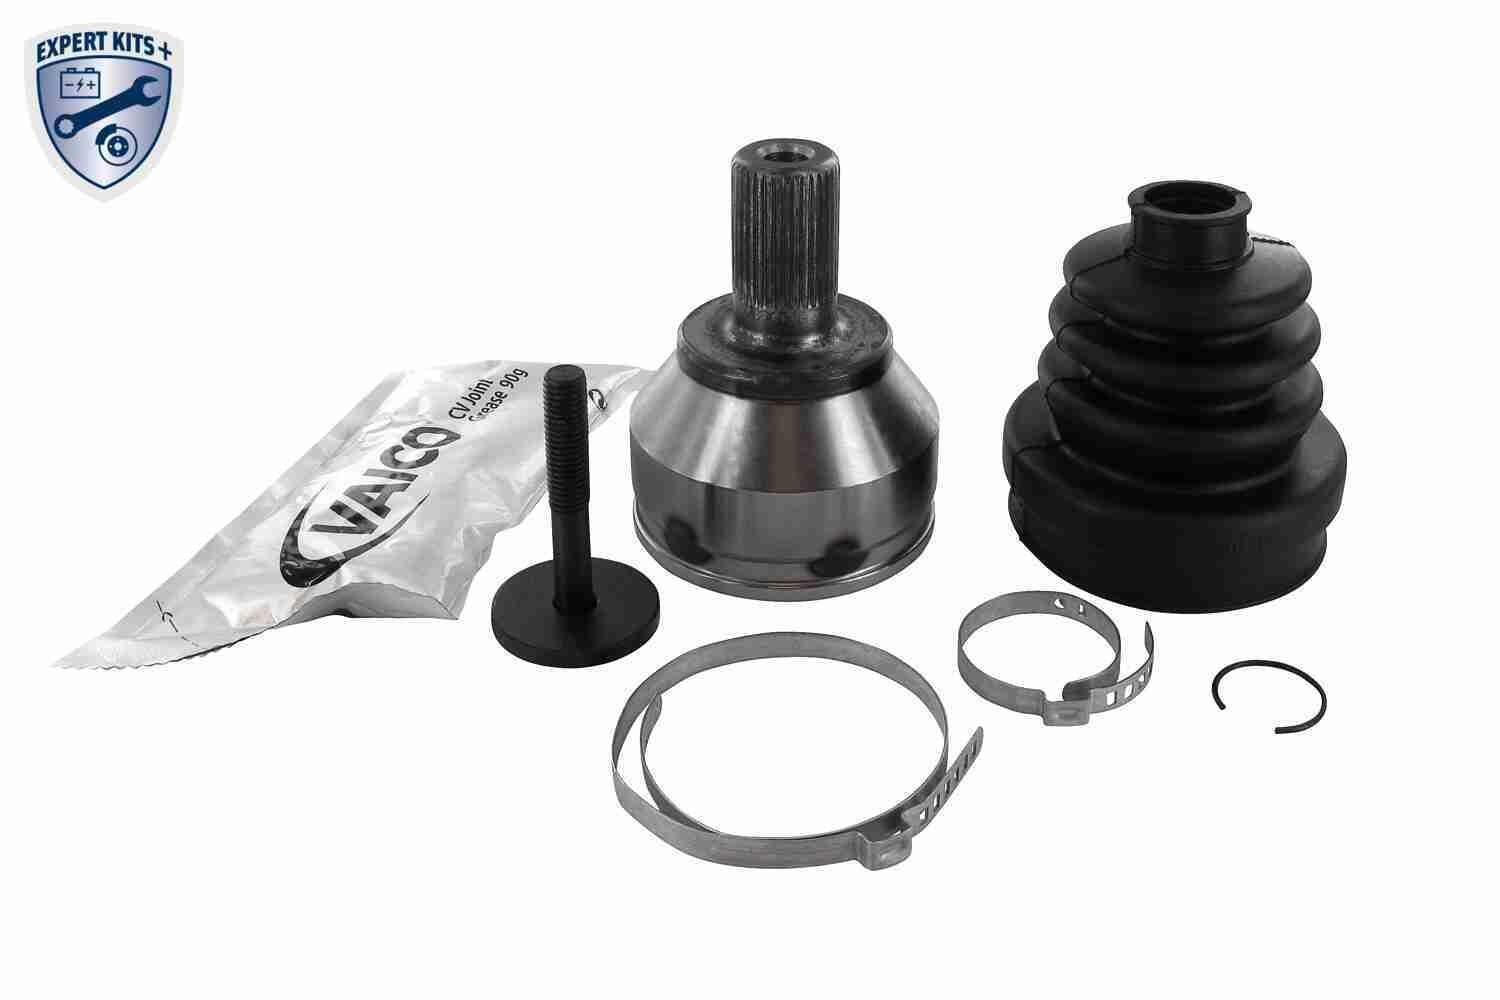 VAICO V25-0511 Joint kit, drive shaft EXPERT KITS +, Wheel Side, without ABS ring